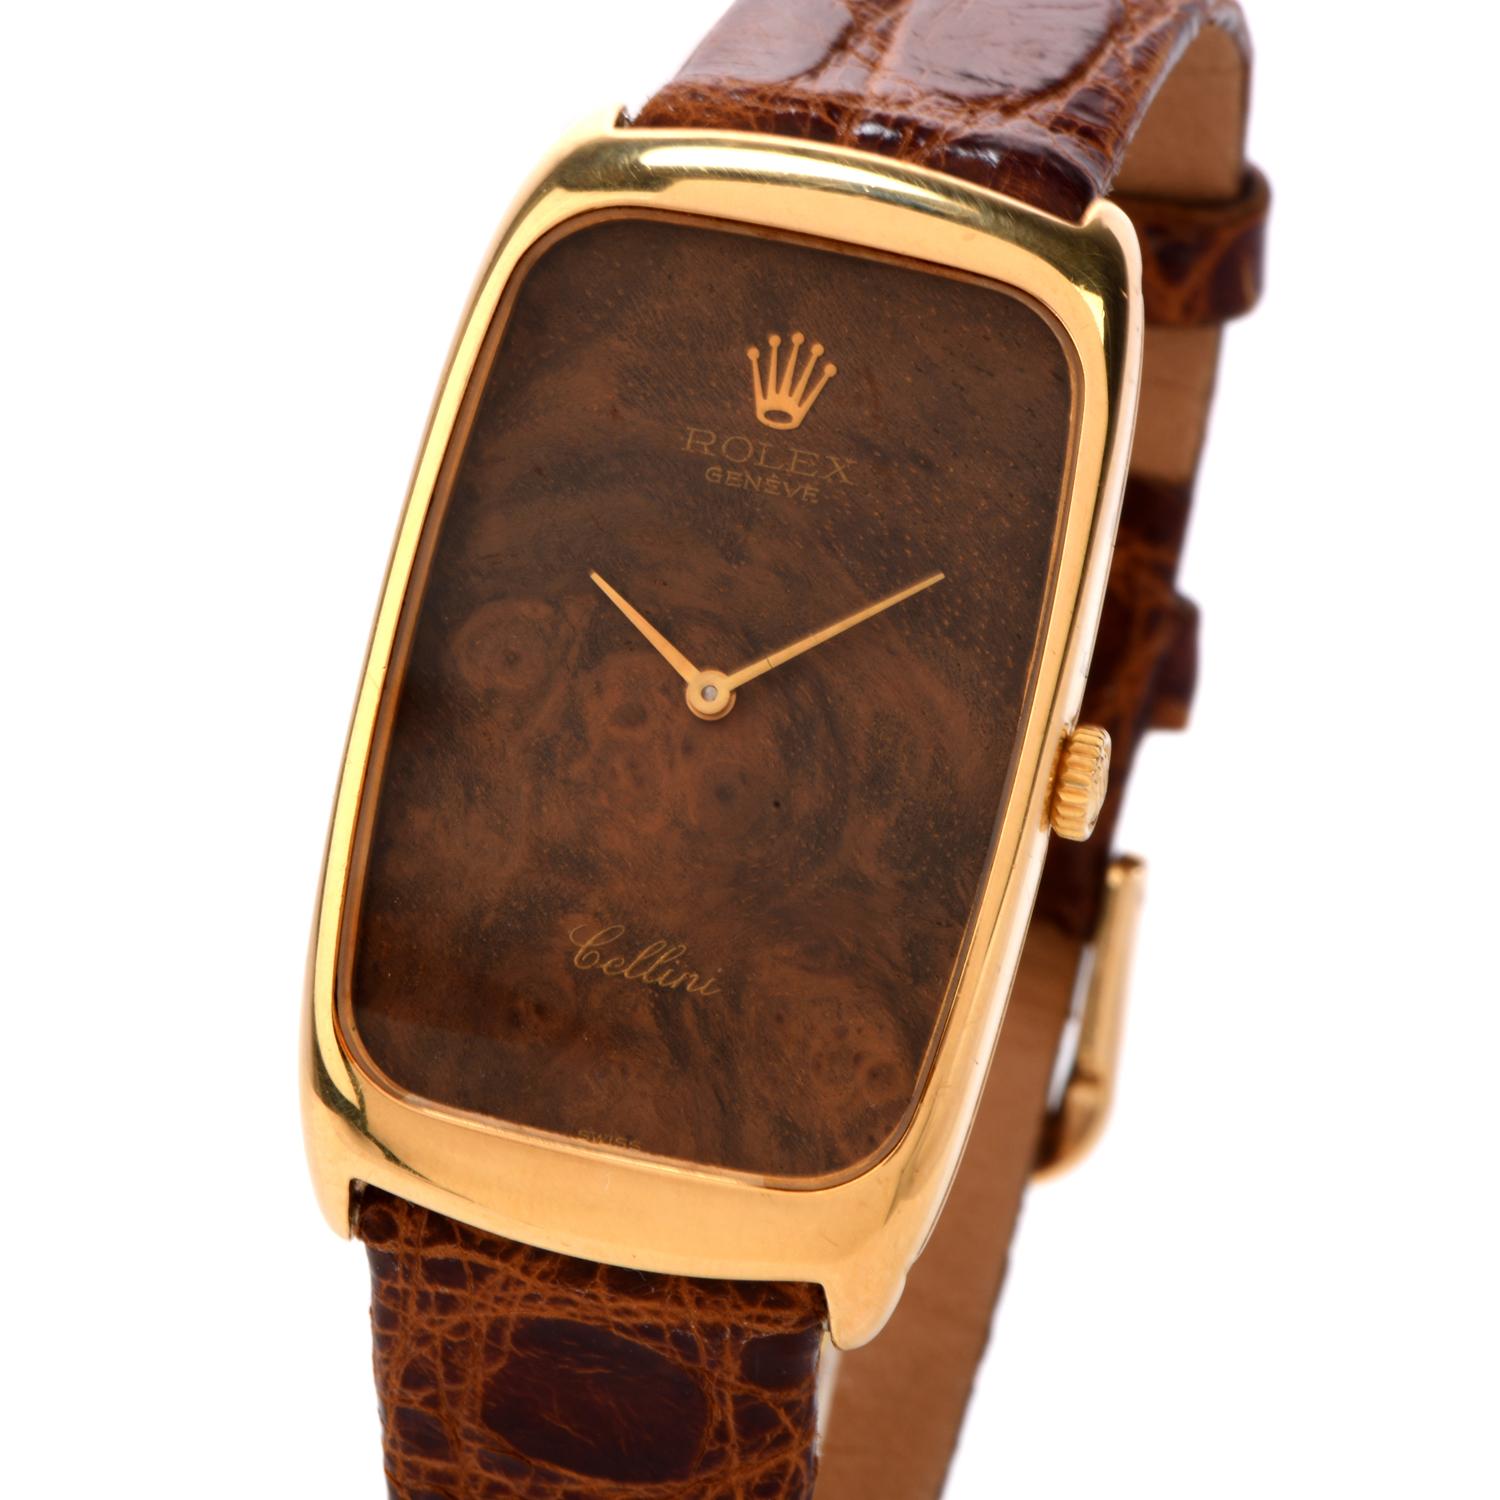 Be exemplary and professional with this handsome Vintage Rolex Cellini 18K Gold Wood Dial Leather Watch.  This watch
 has an elongated cushion-shaped 18 karat yellow gold case with a rare brown wooden dial with Rolex mechanical winding Movement.  